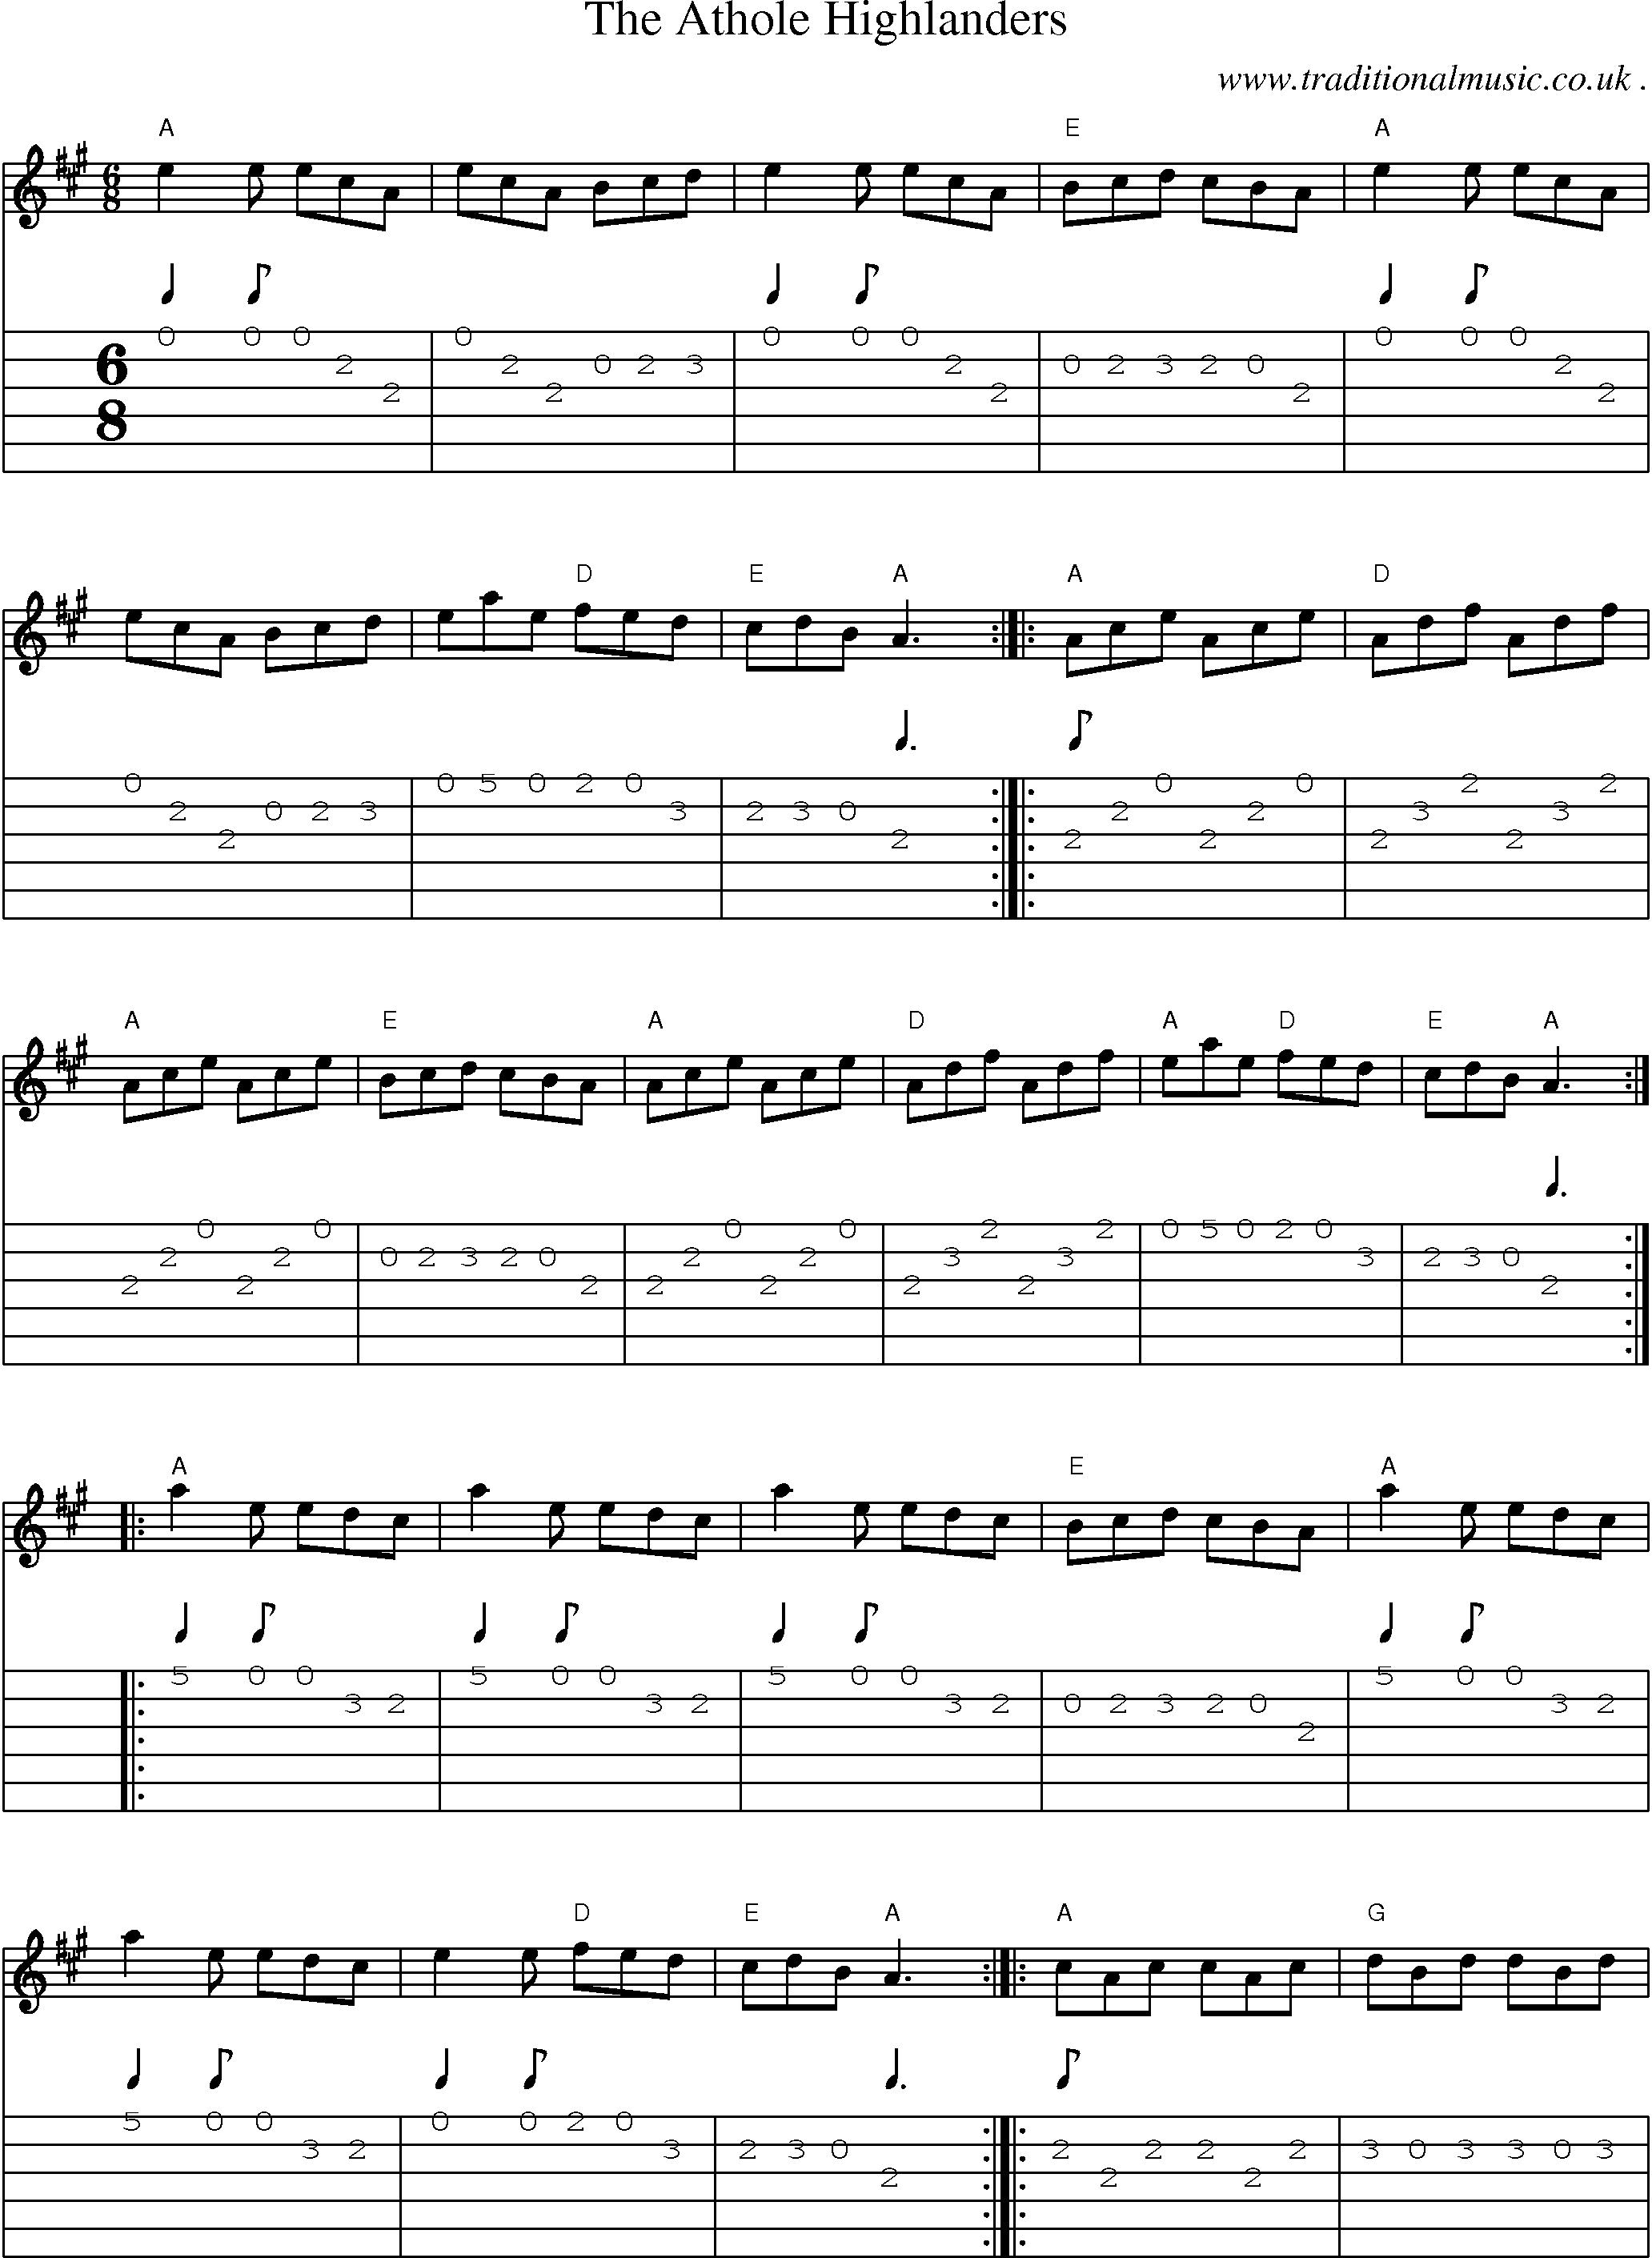 Music Score and Guitar Tabs for The Athole Highlanders